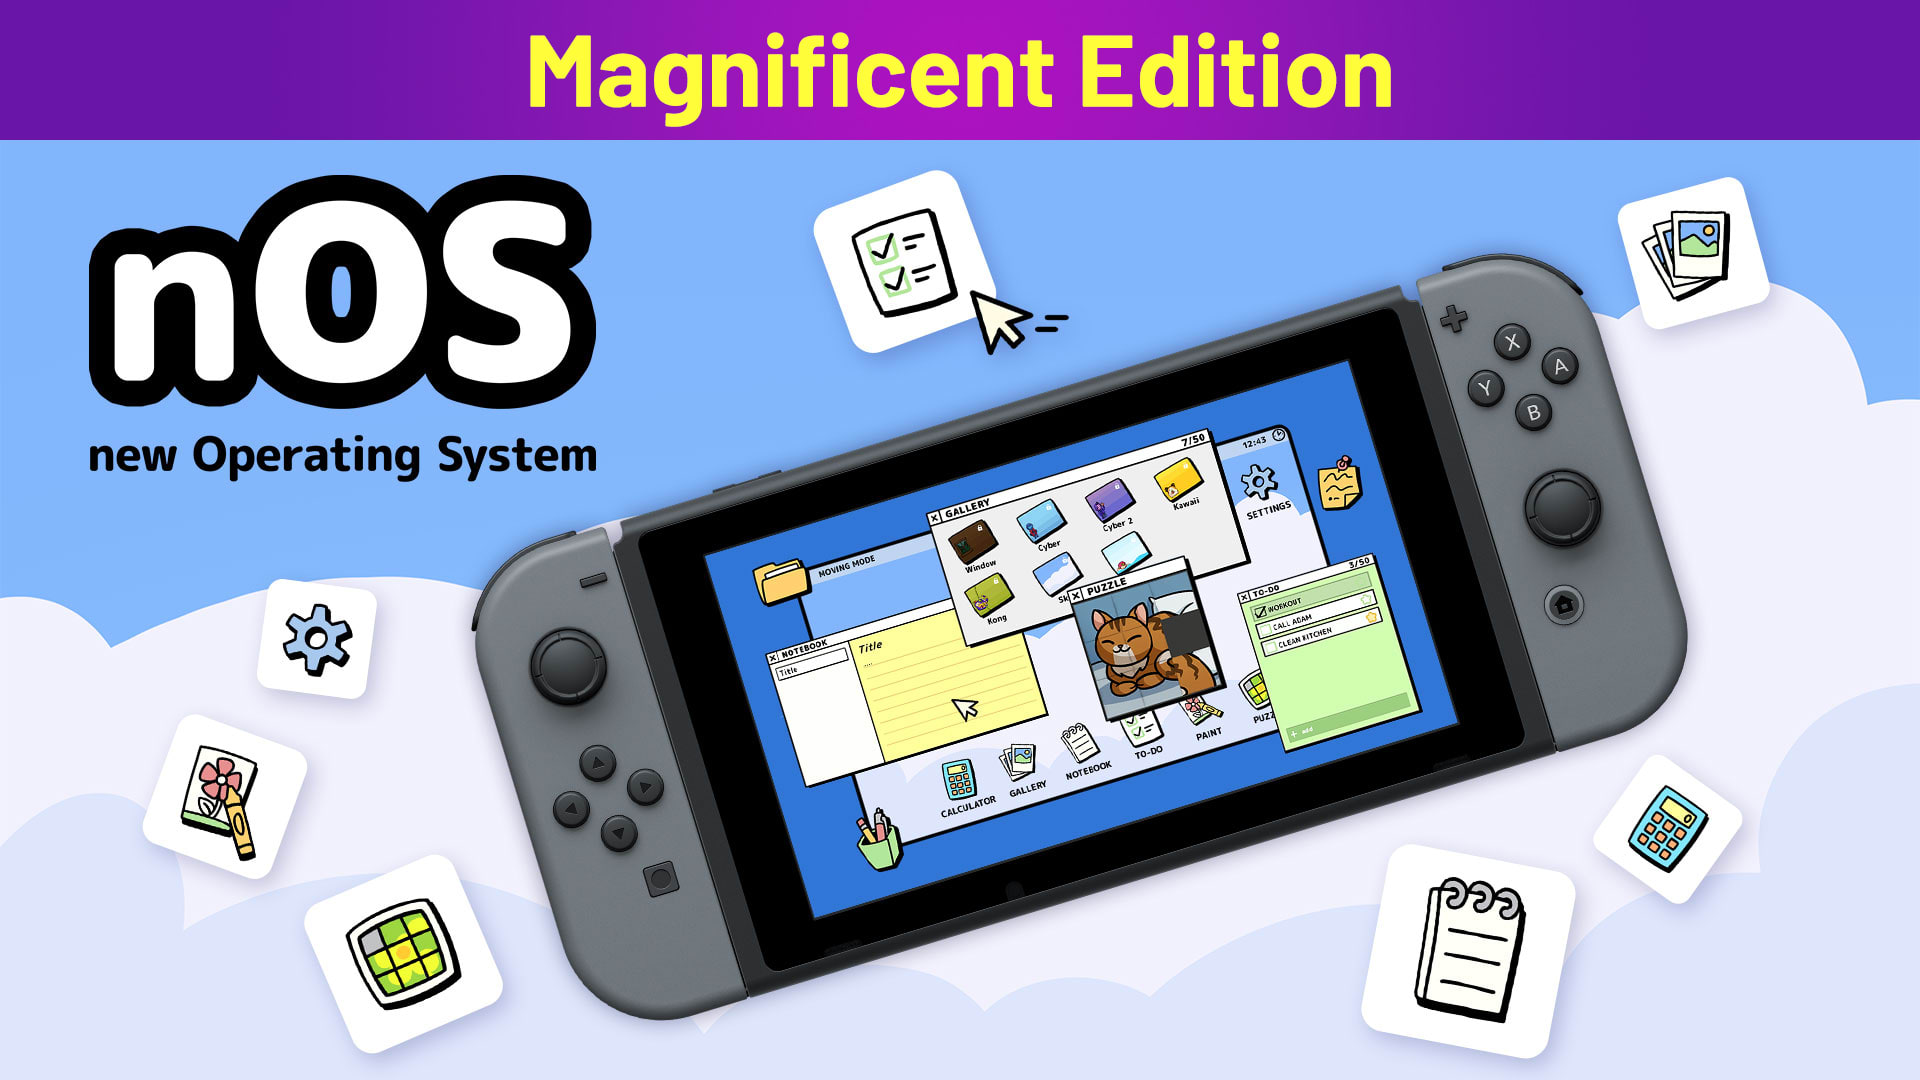 nOS new Operating System Magnificent Edition 1